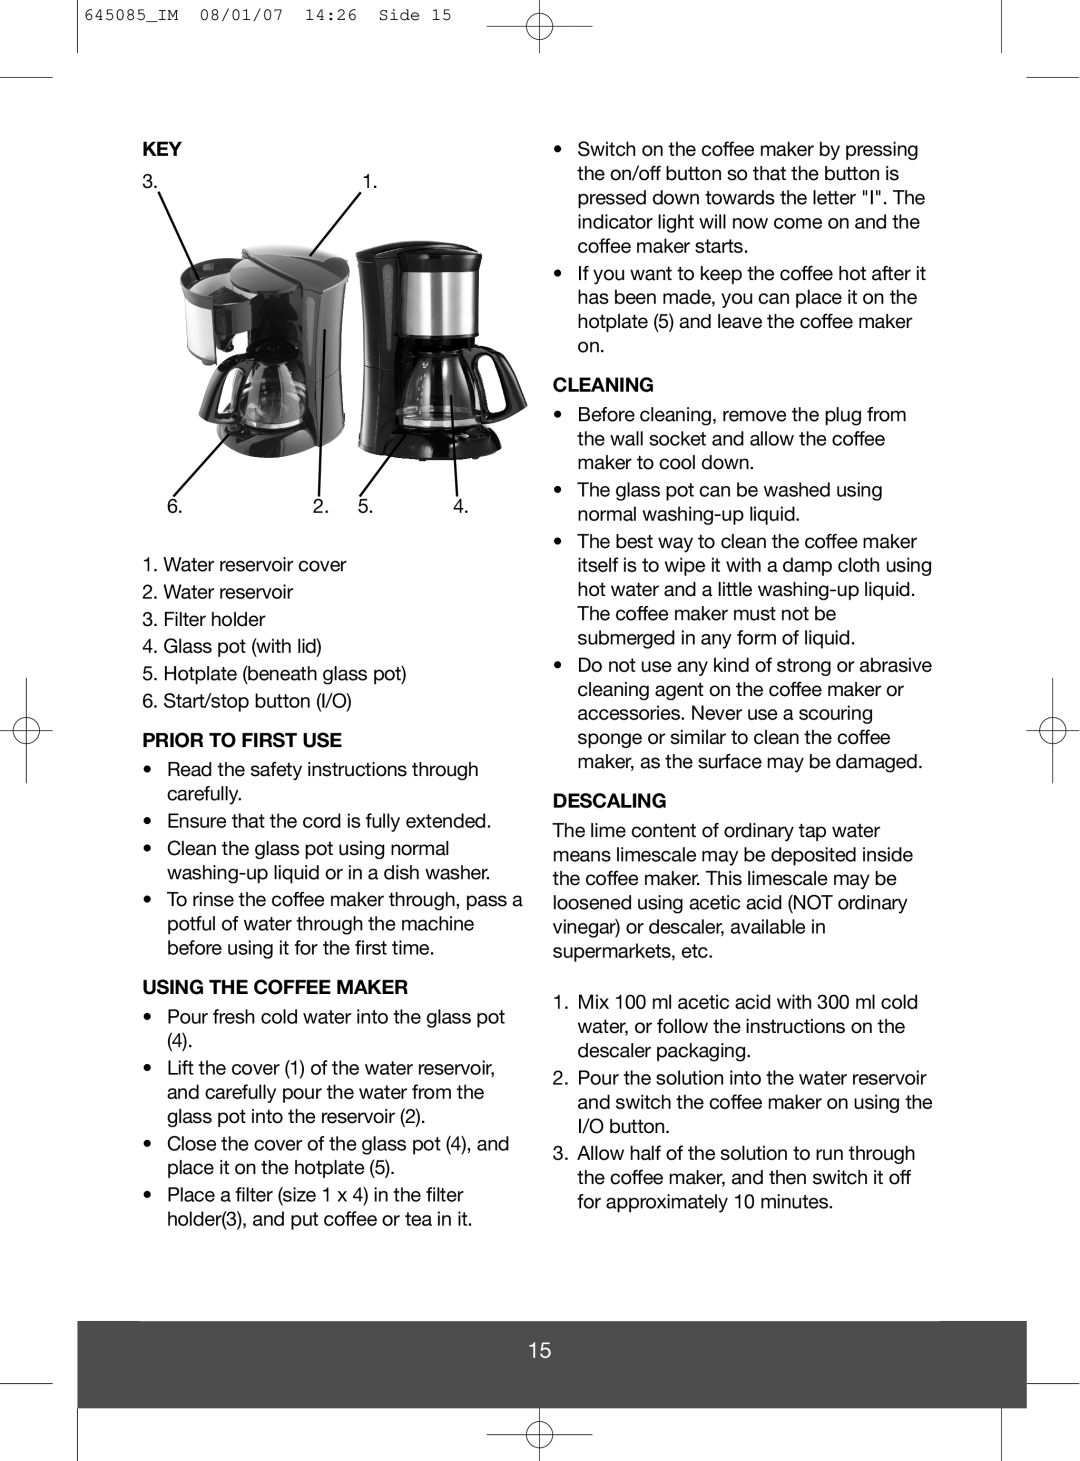 Butler 645-260 manual Prior To First Use, Using The Coffee Maker, Cleaning, Descaling 